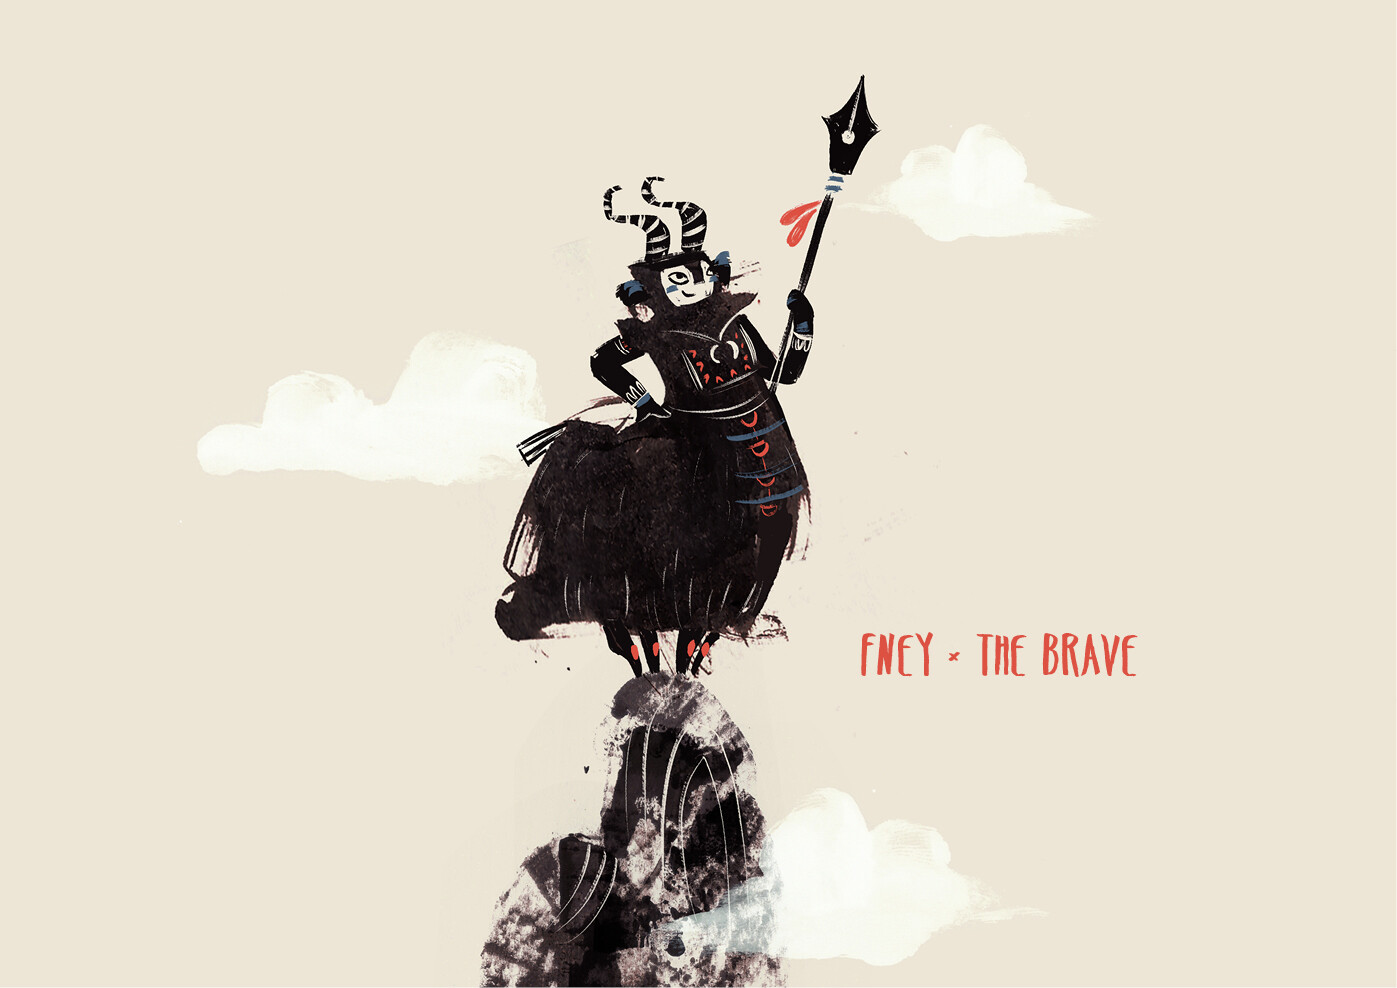 The Brave
Fney is the spirit of the brave artist who will try over and over again, persisting in finding the right way. But she is more strong-headed than clever and sometimes picks fights where a little bit of cunning may have gone the longer way.